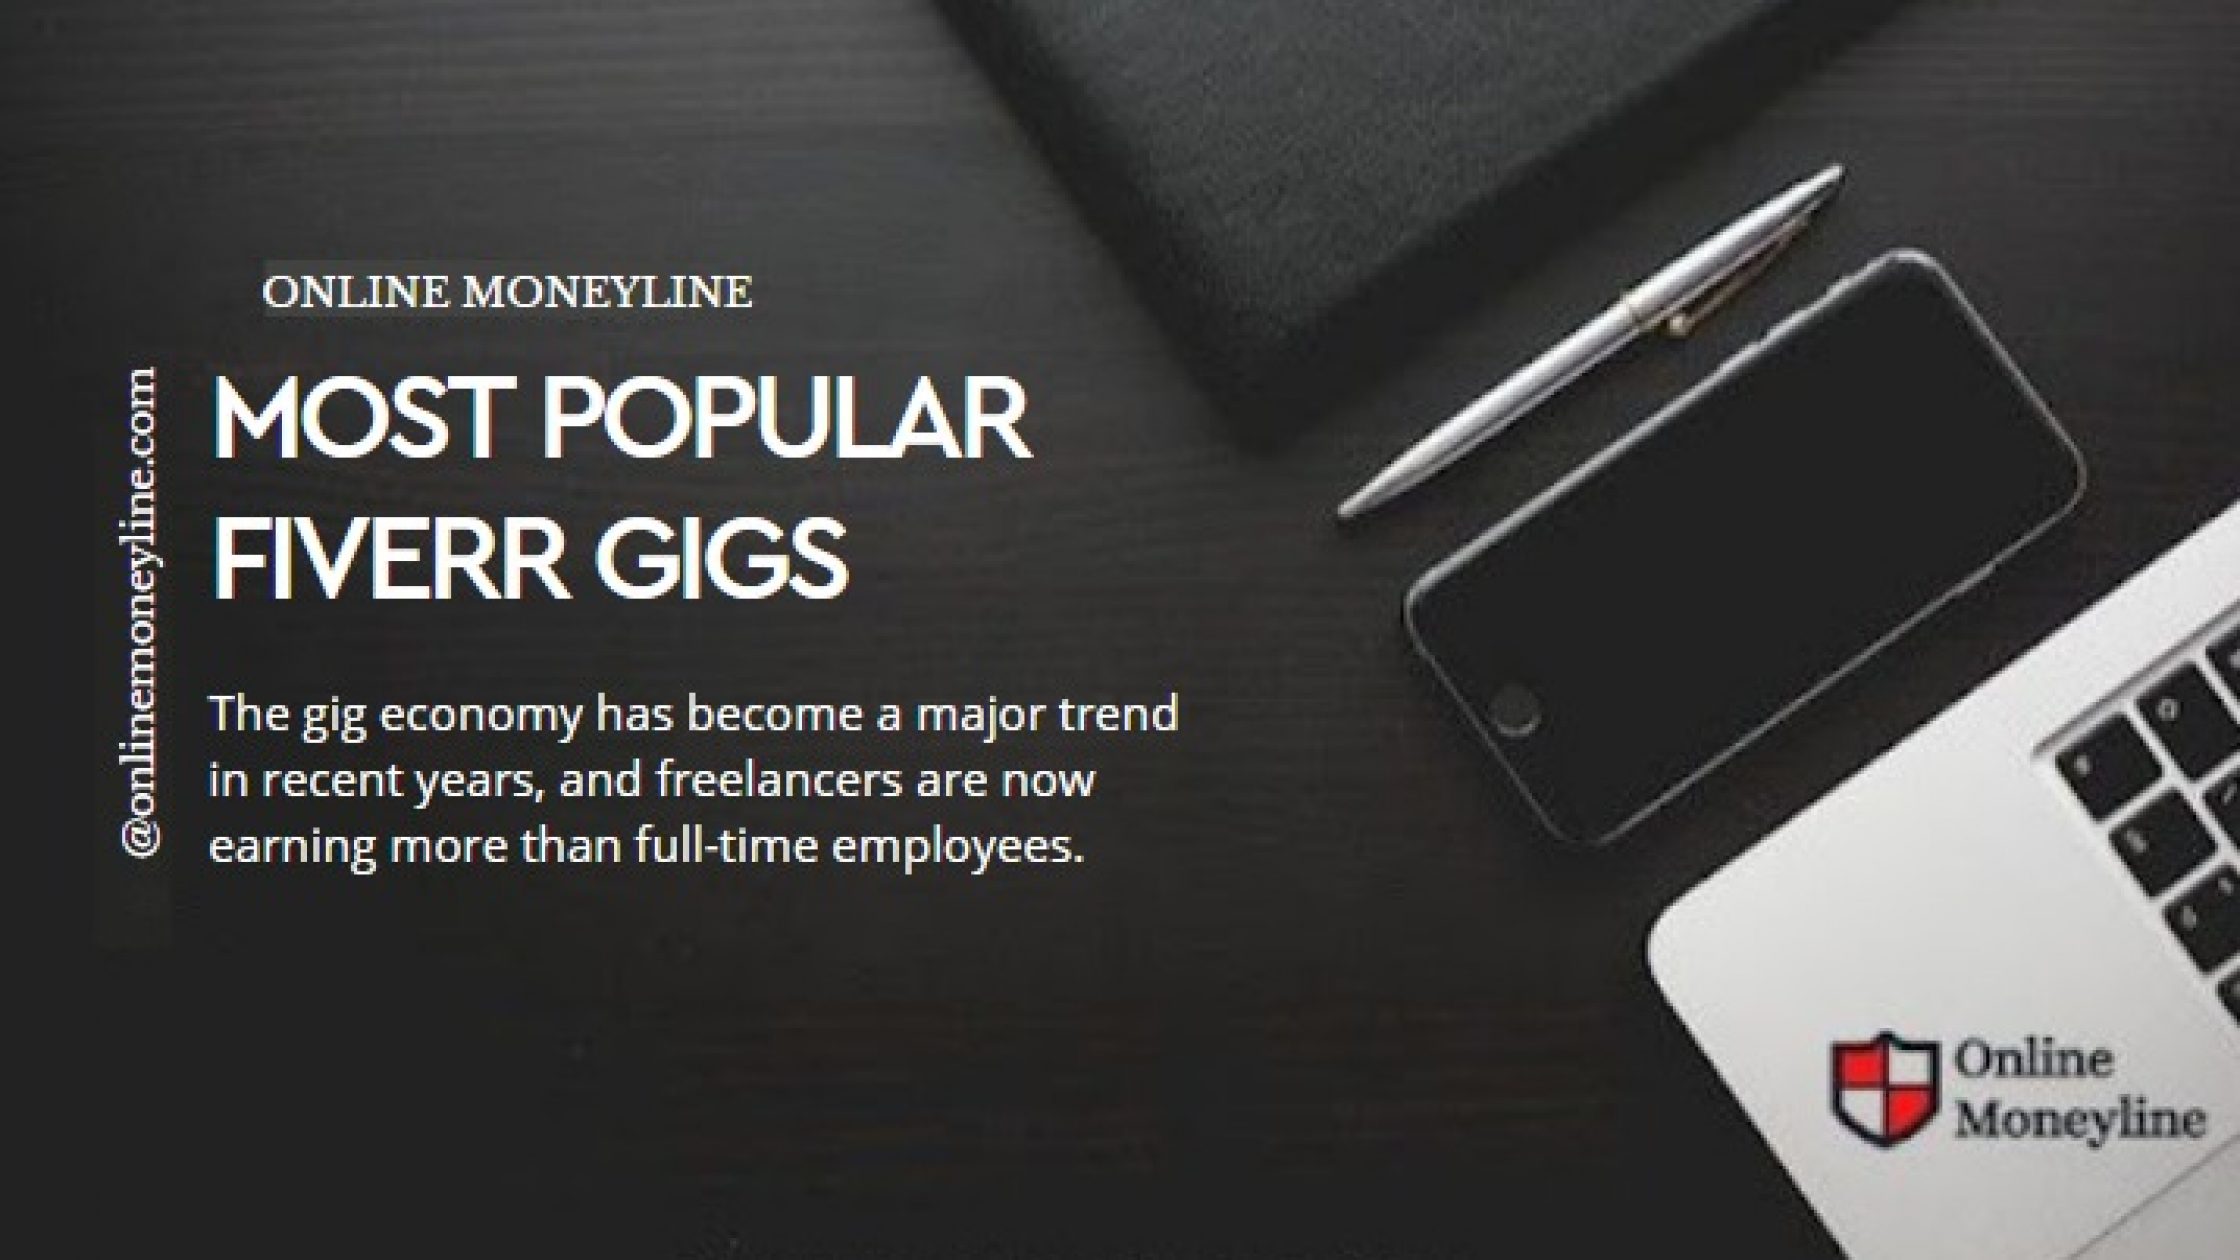 Most popular fiverr gigs